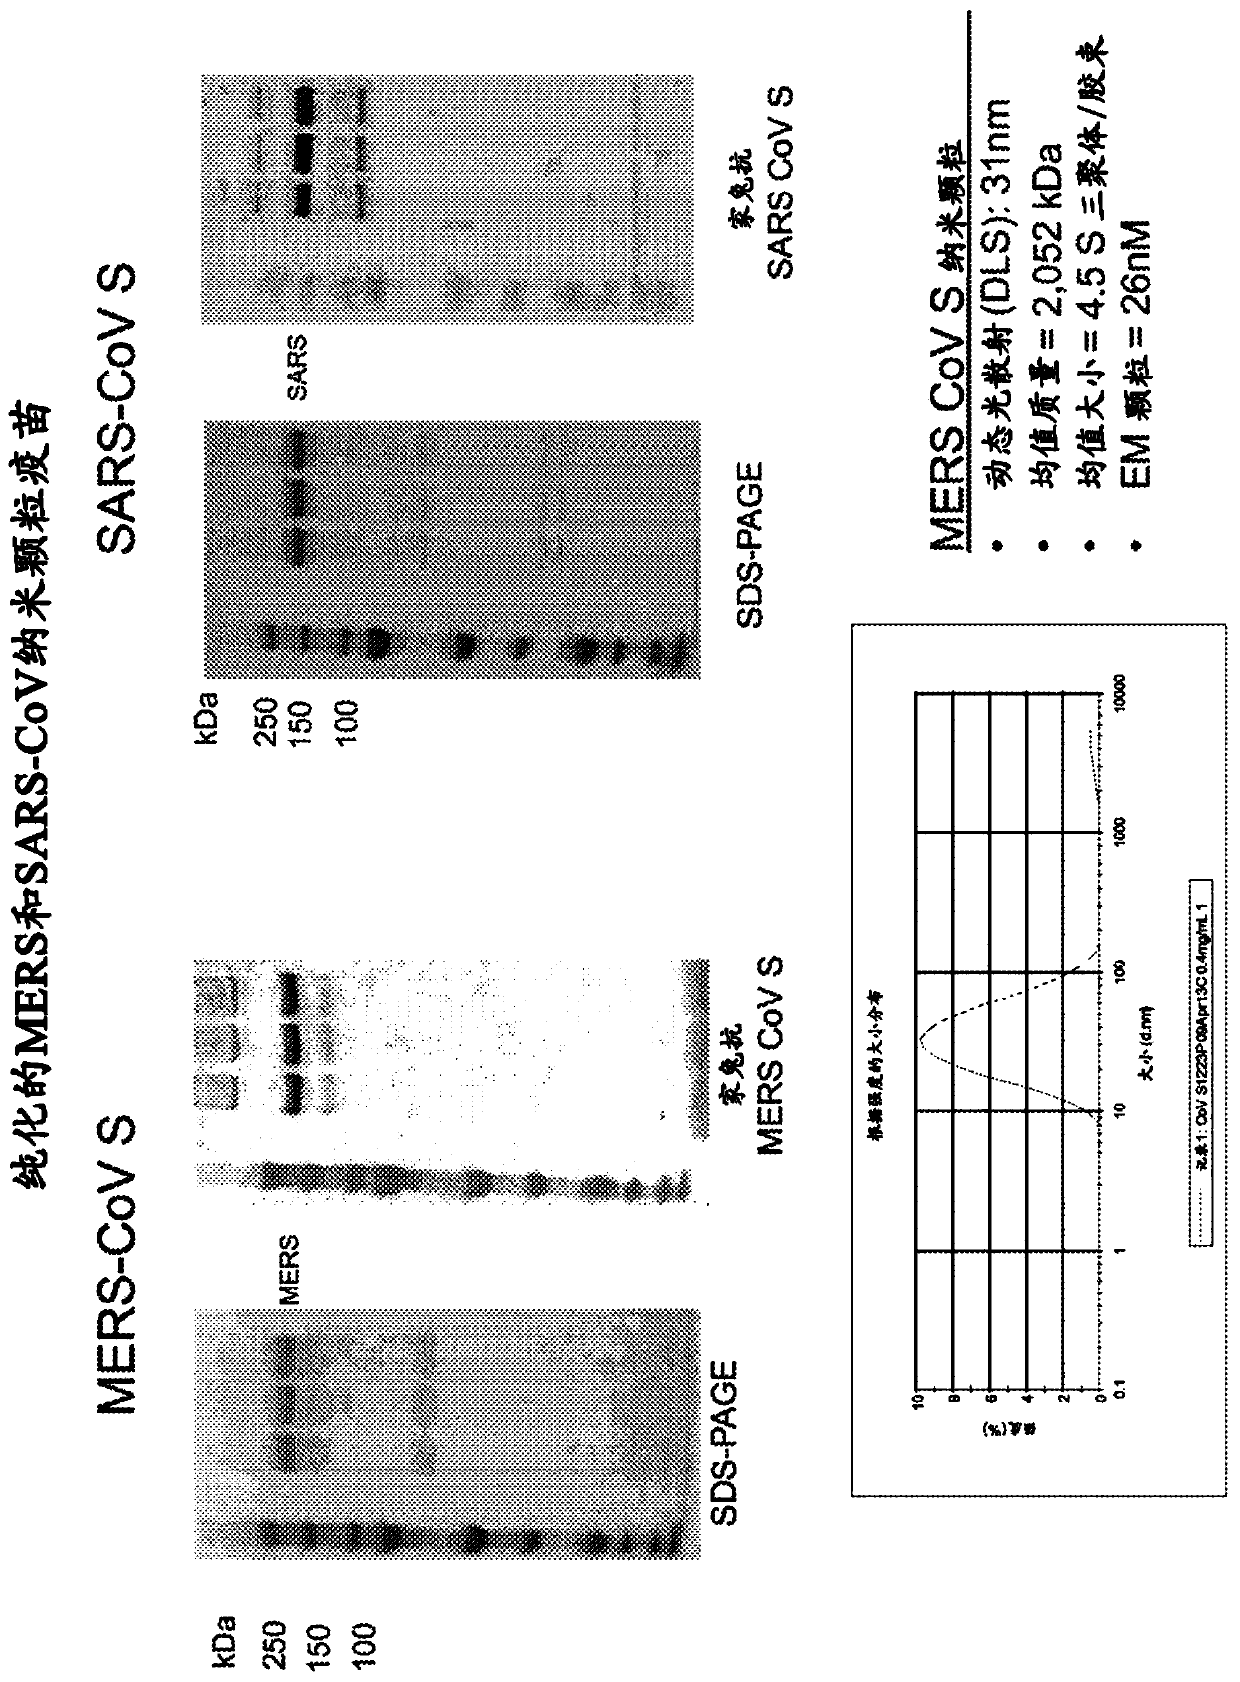 Immunogenic Middle East respiratory syndrome coronavirus (mers-cov) compositions and methods